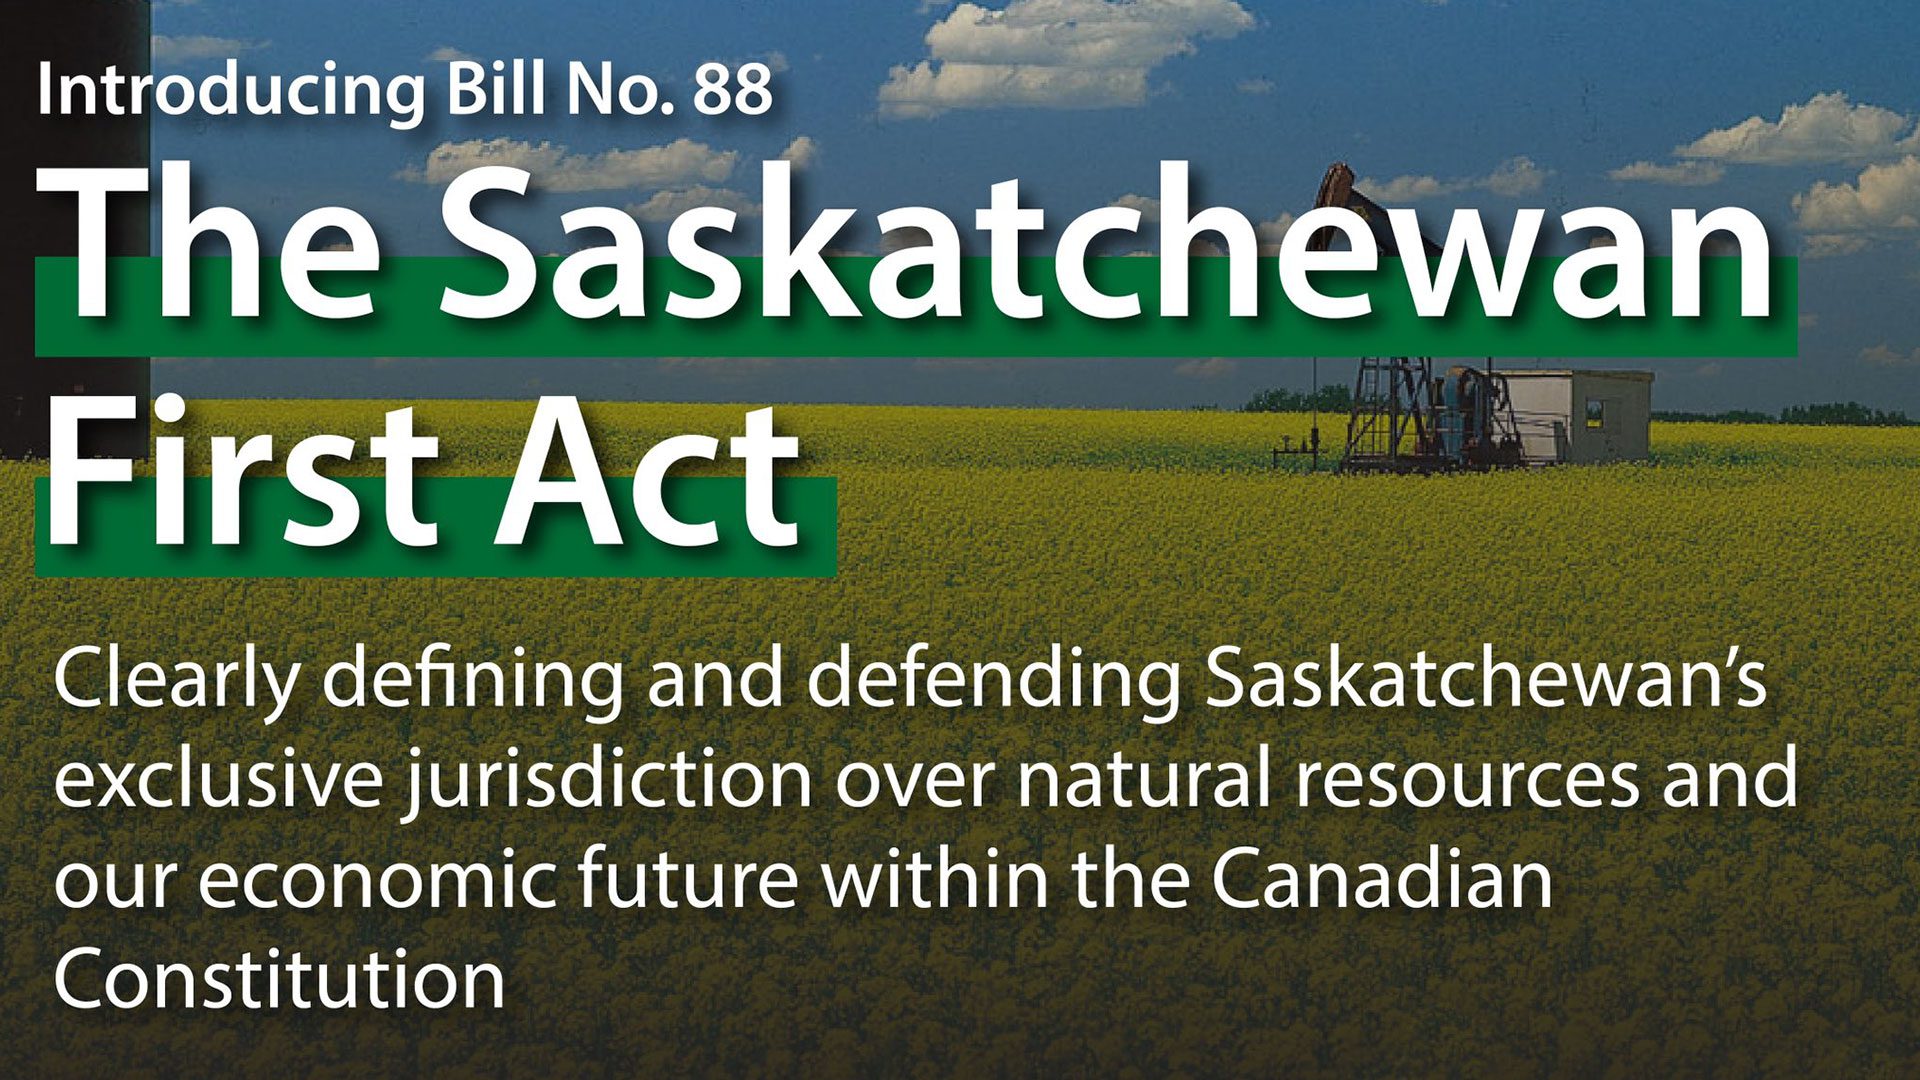 Saskatchewan First Act panned by First Nations in province